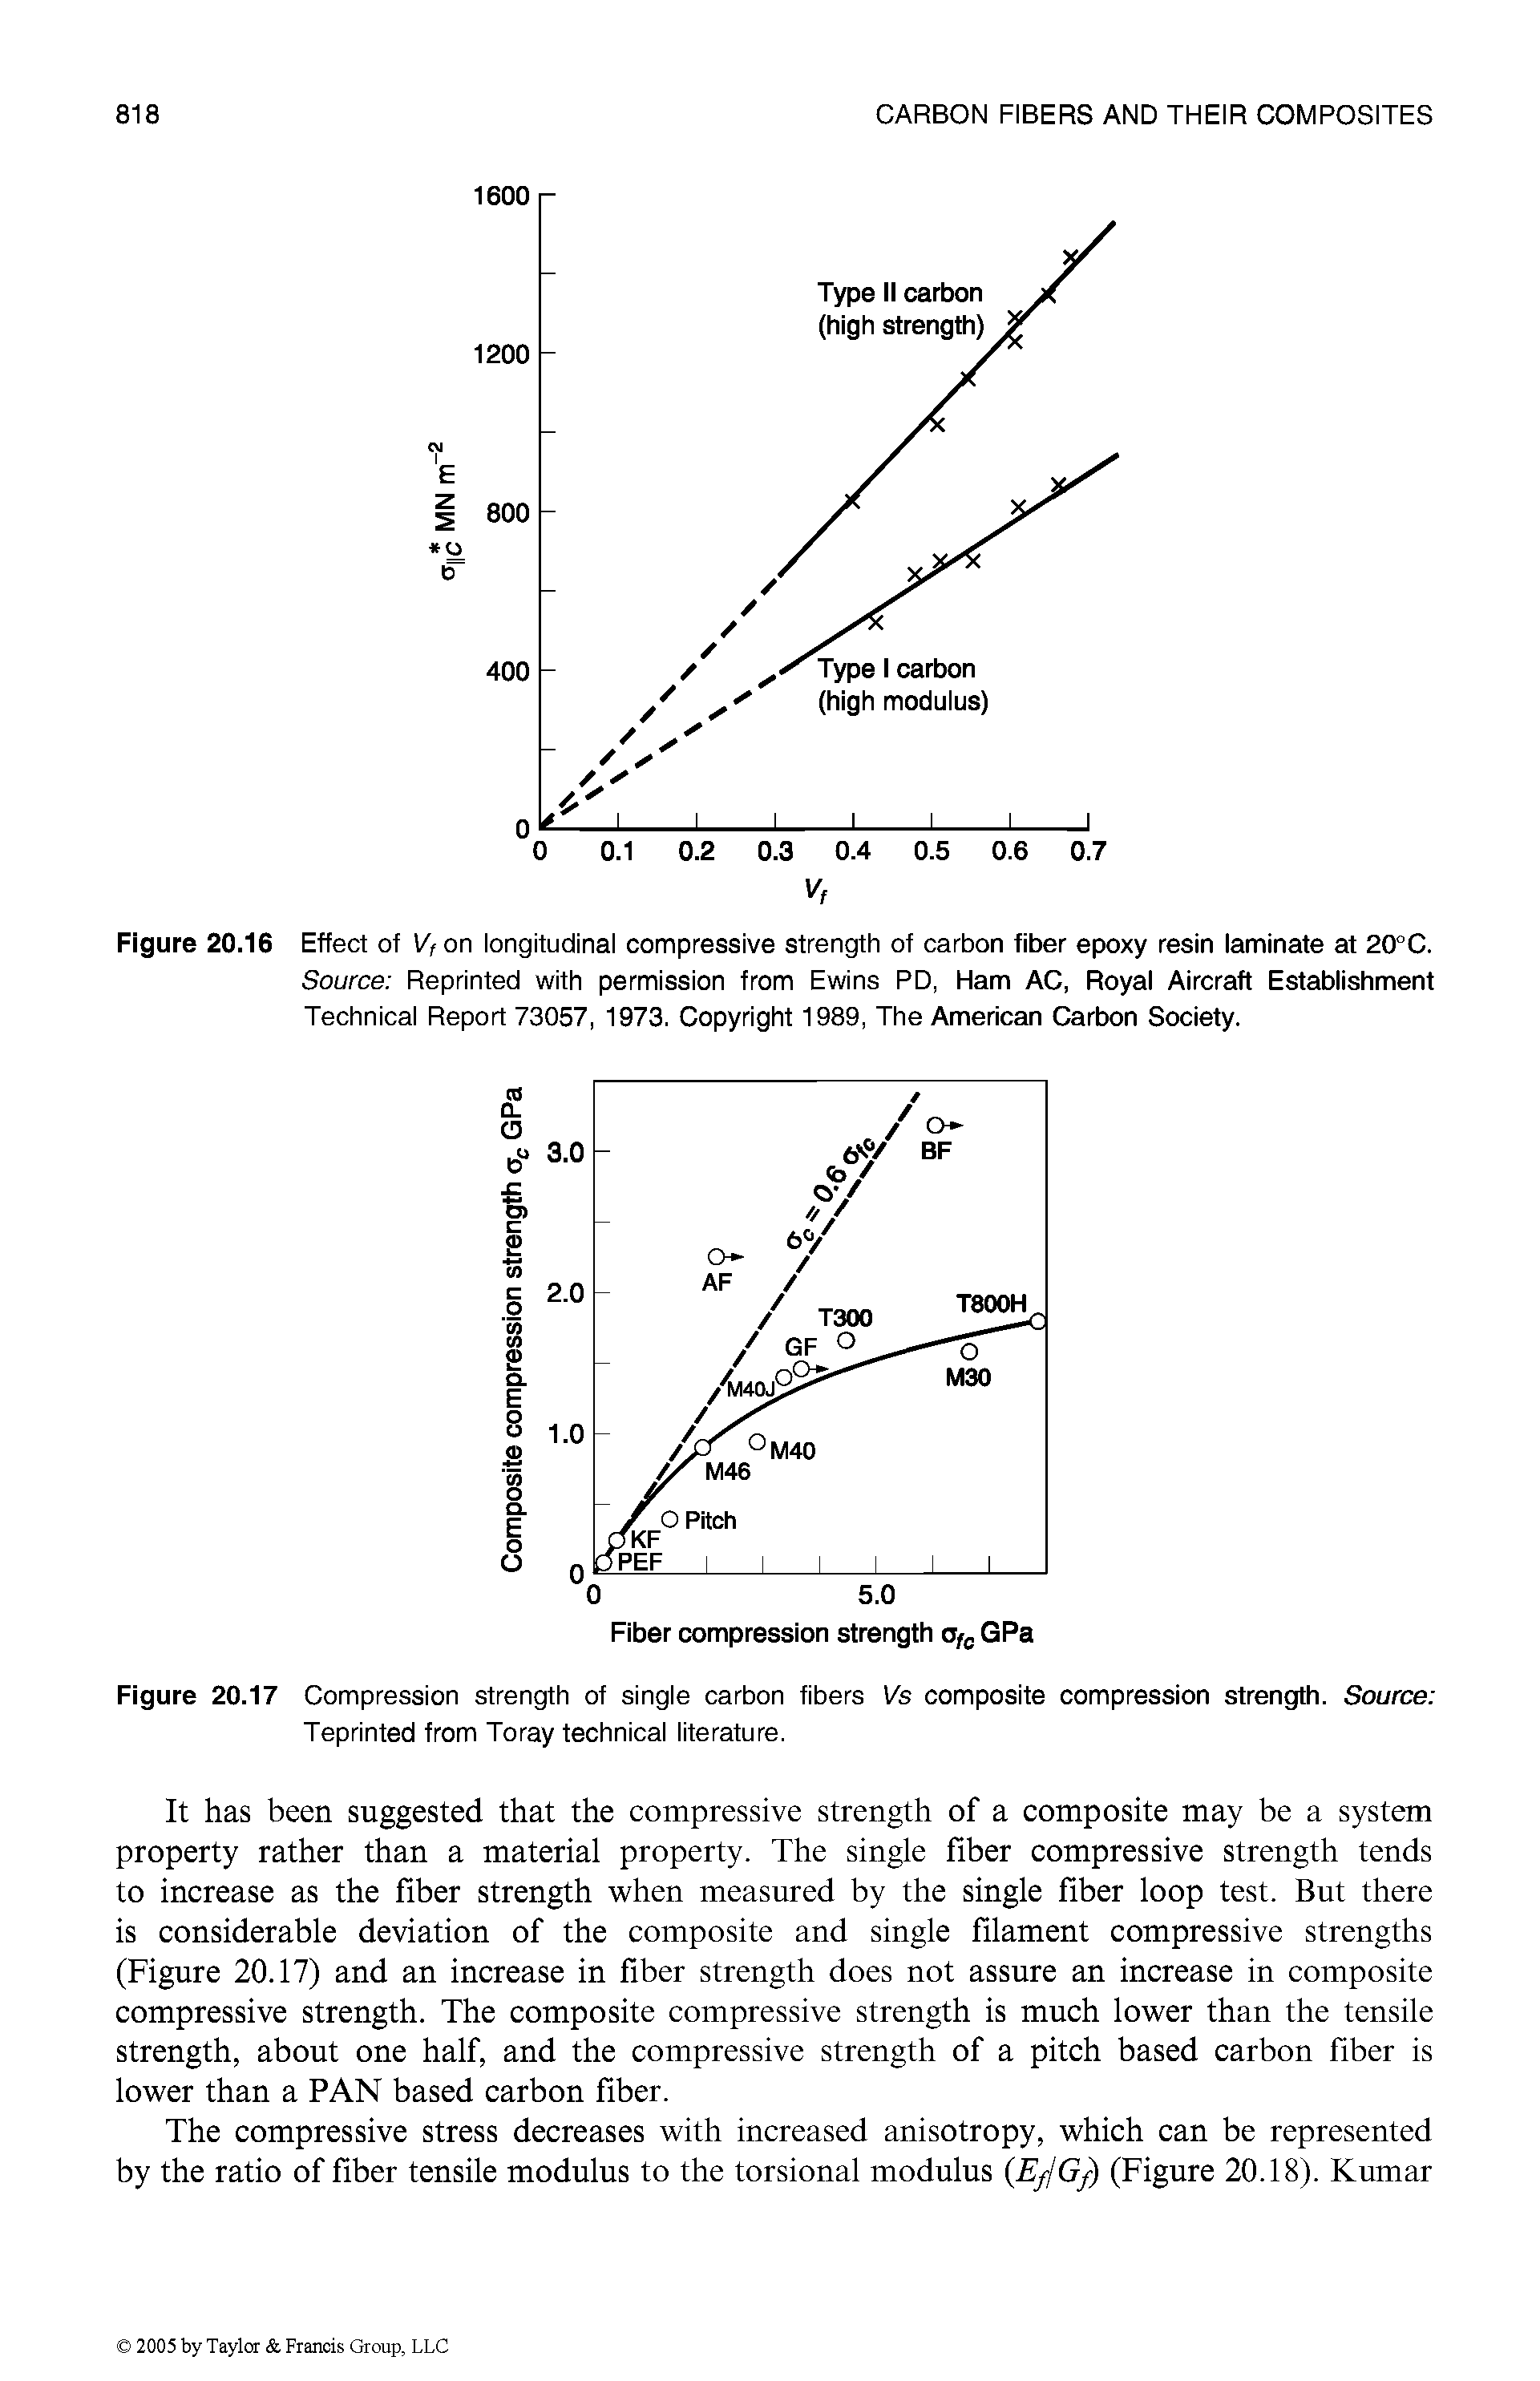 Figure 20.17 Compression strength of single carbon fibers Vs composite compression strength. Source Teprinted from Toray technical literature.